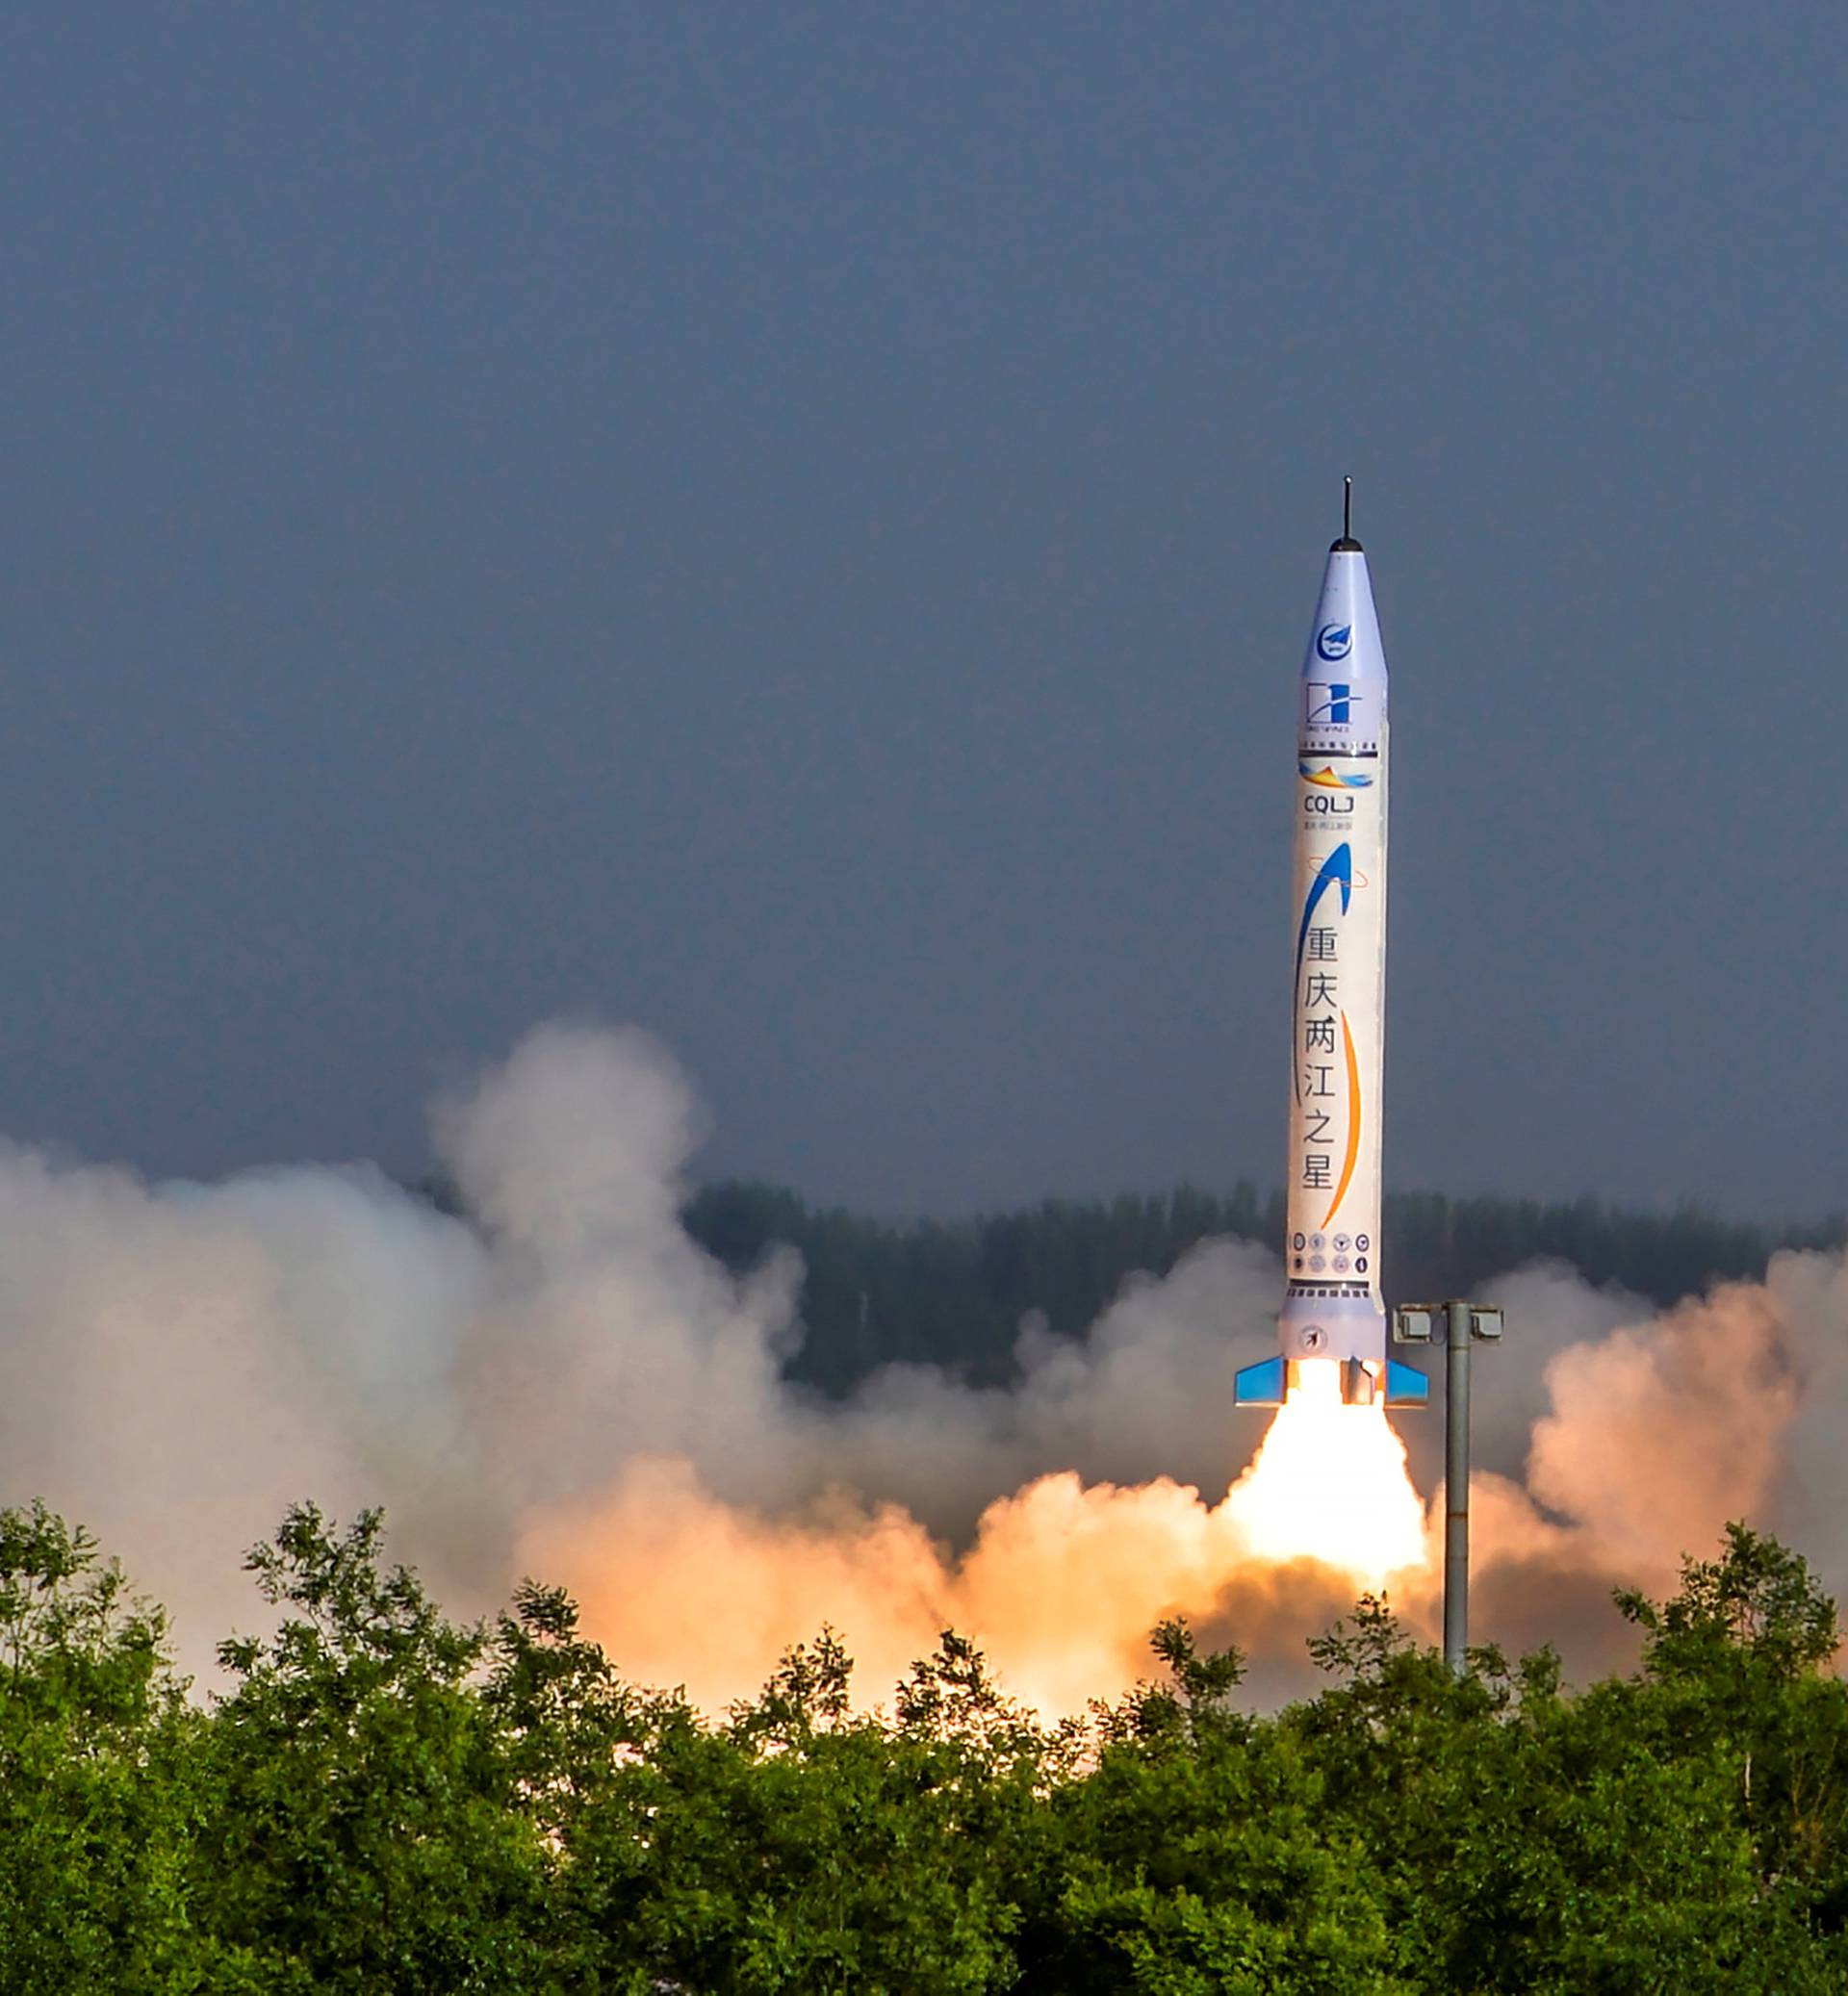 "Chongqing Liangjiang Star" rocket, developed by Chinese private firm OneSpace Technology, takes off from a launchpad in an undisclosed location in northwestern China